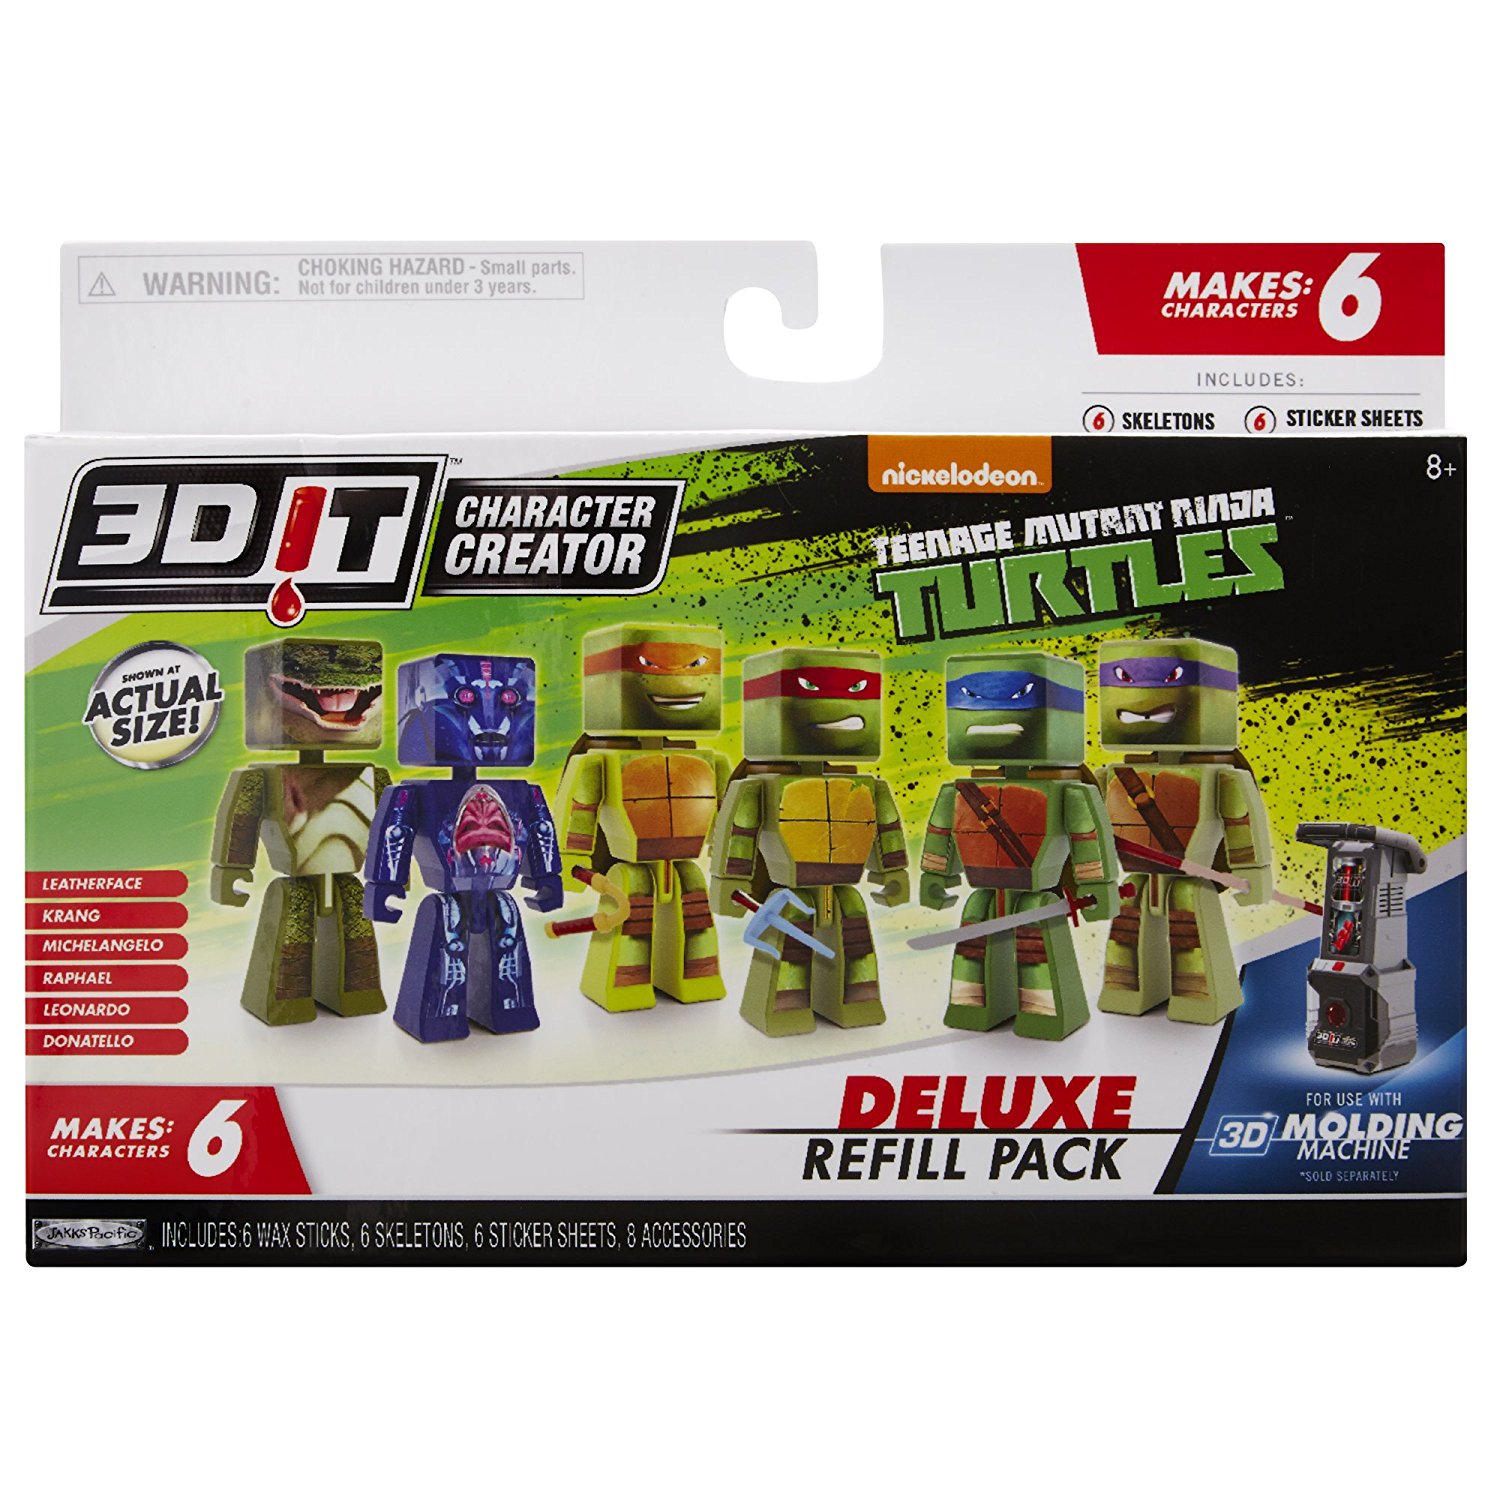 3DIT Character Creator TMNT Deluxe Refill Pack - Click Image to Close